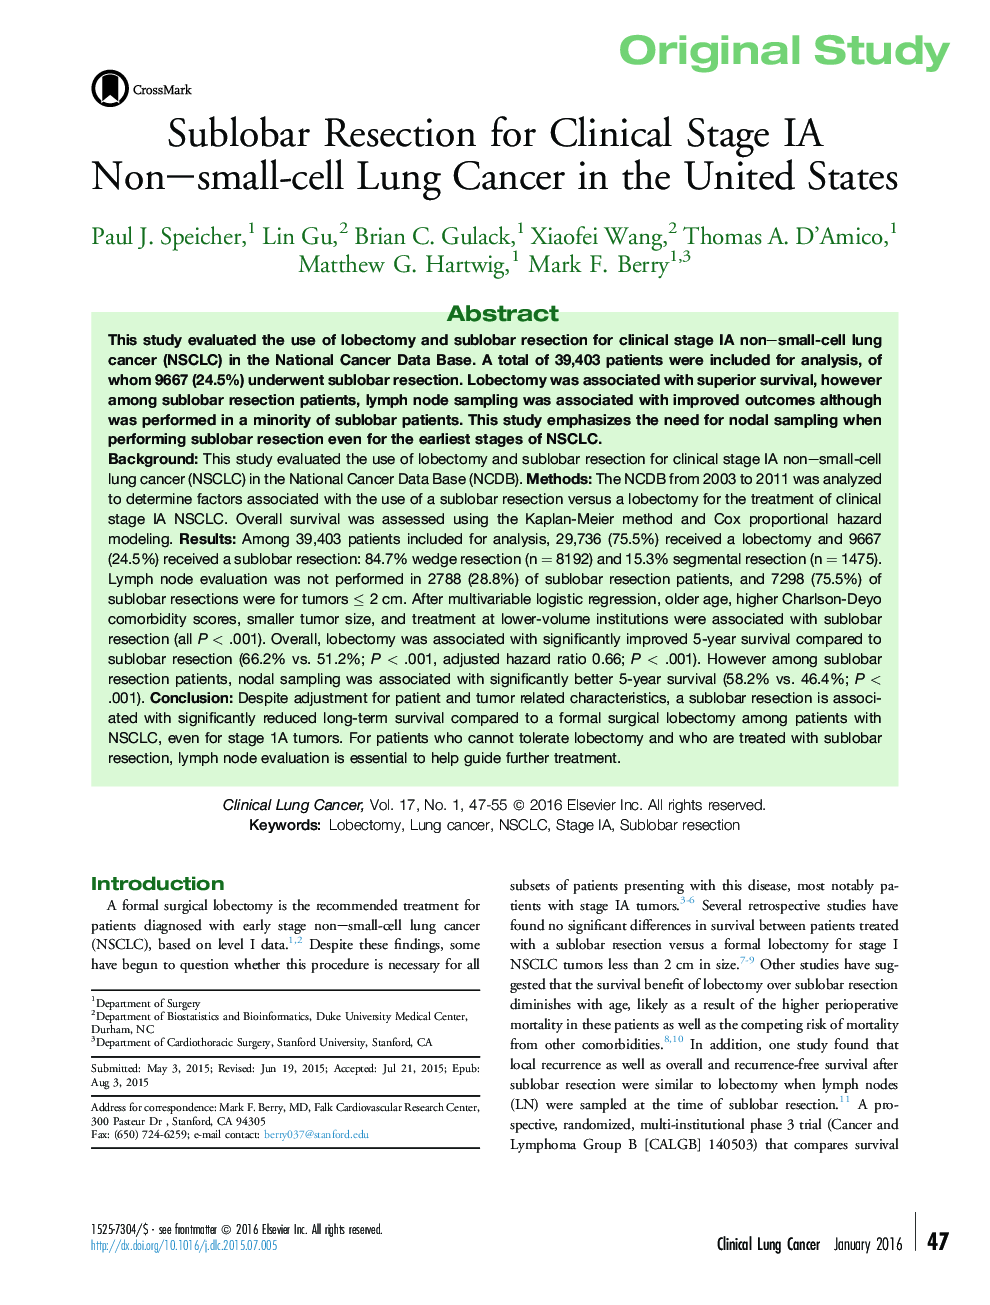 Original StudySublobar Resection for Clinical Stage IA Non-small-cell Lung Cancer in the United States